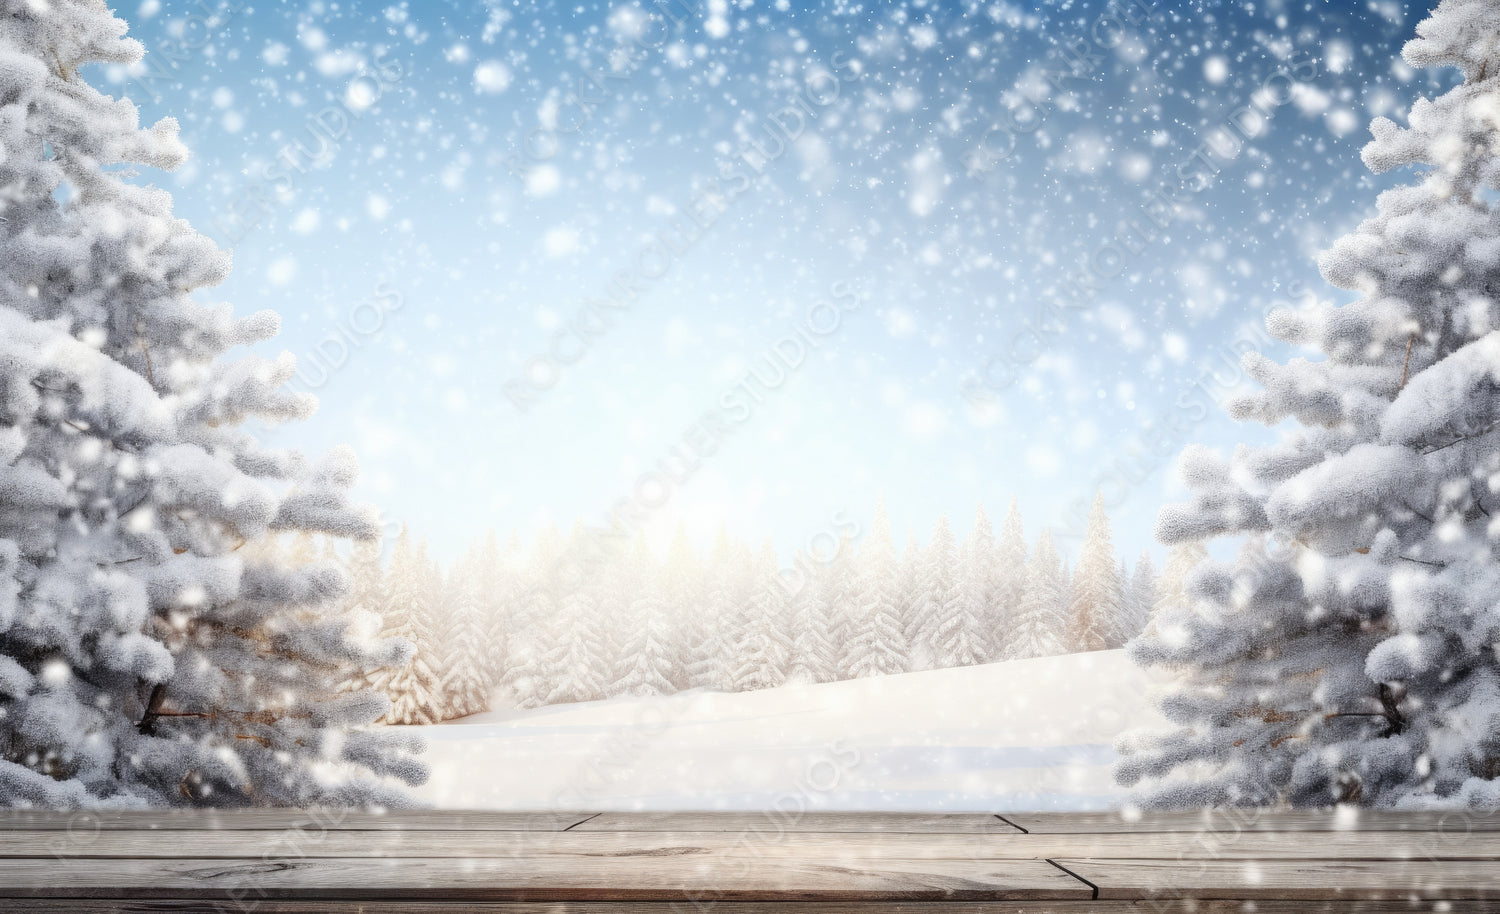 Winter christmas scenic background with copy space and snowfall. Wooden flooring was strewn with snow in forest and the branches of fir-trees covered with snow on nature.